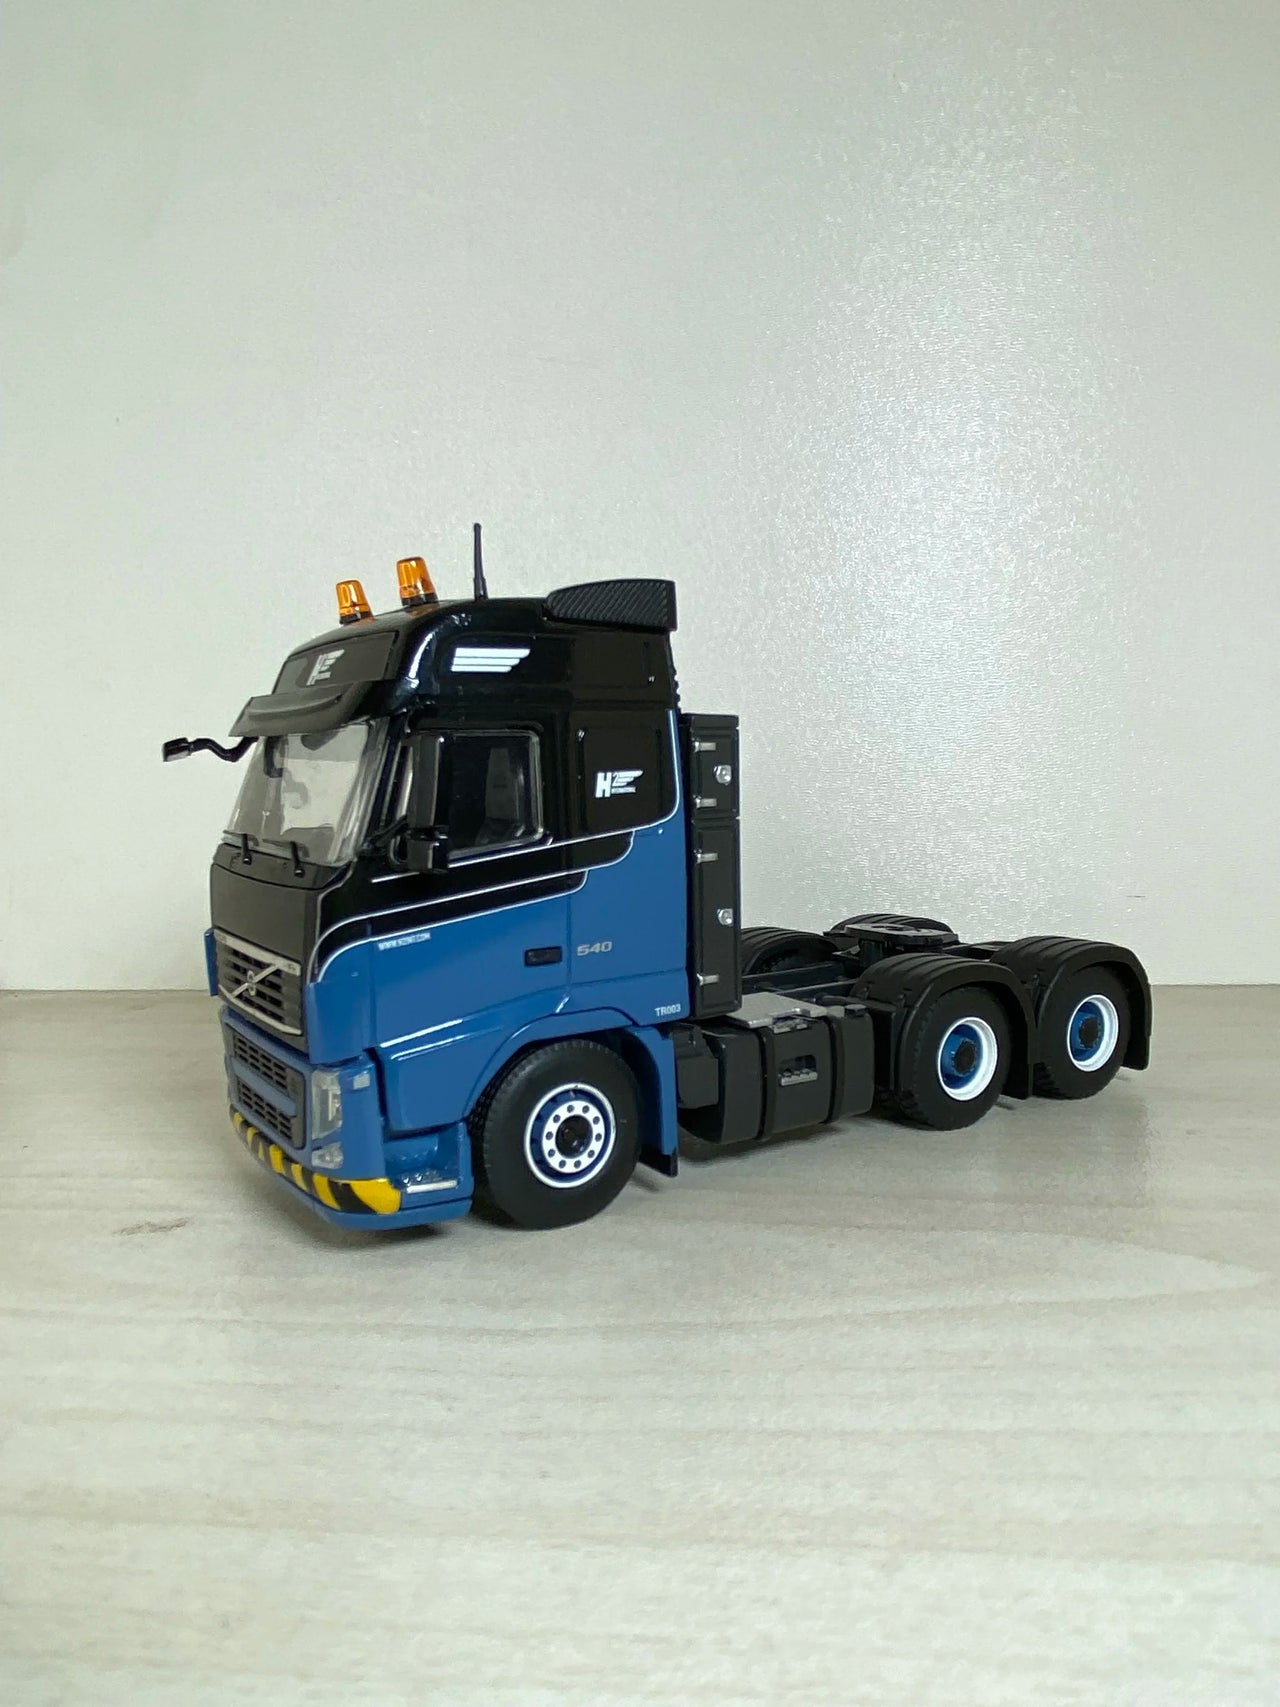 33-0018 Volvo H2 International Tractor Truck Scale 1:50 (Discontinued Model)